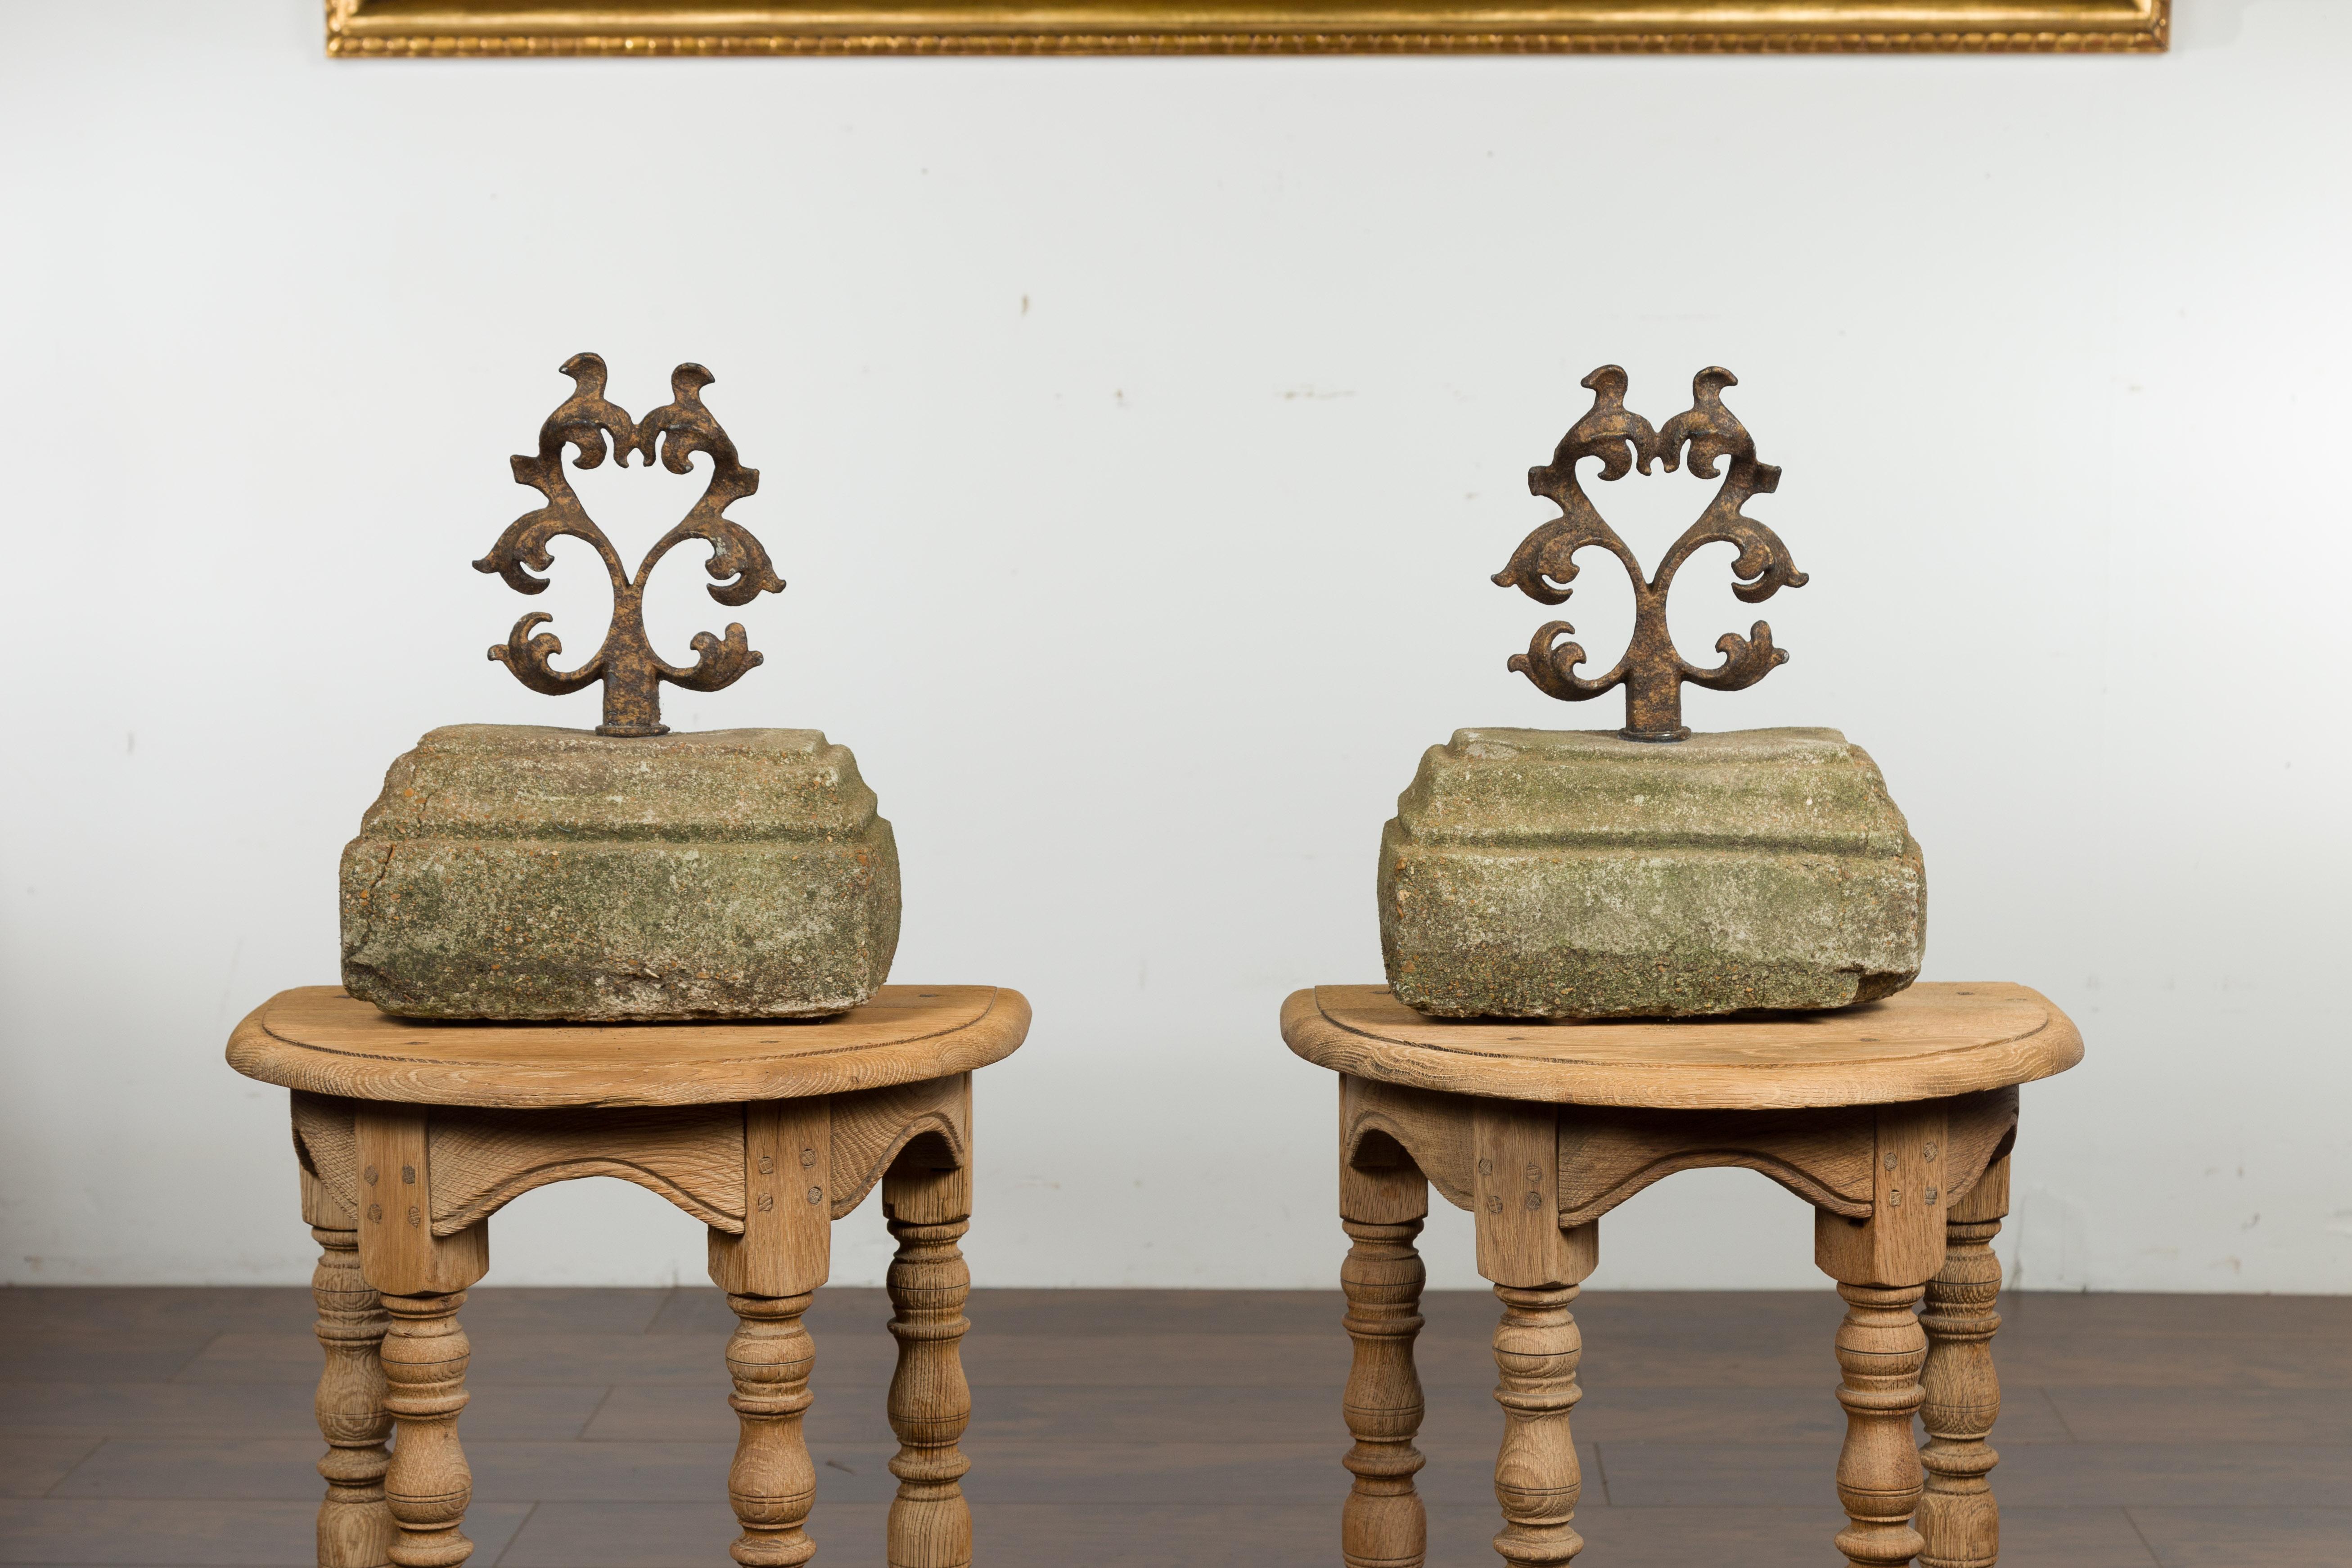 A pair of English iron and stone door stops/boot scrappers from the early 20th century, with scrolling motifs. Created in England at the turn of the century, each of this pair of stone door stops/boot scrappers is topped with double scrolling iron